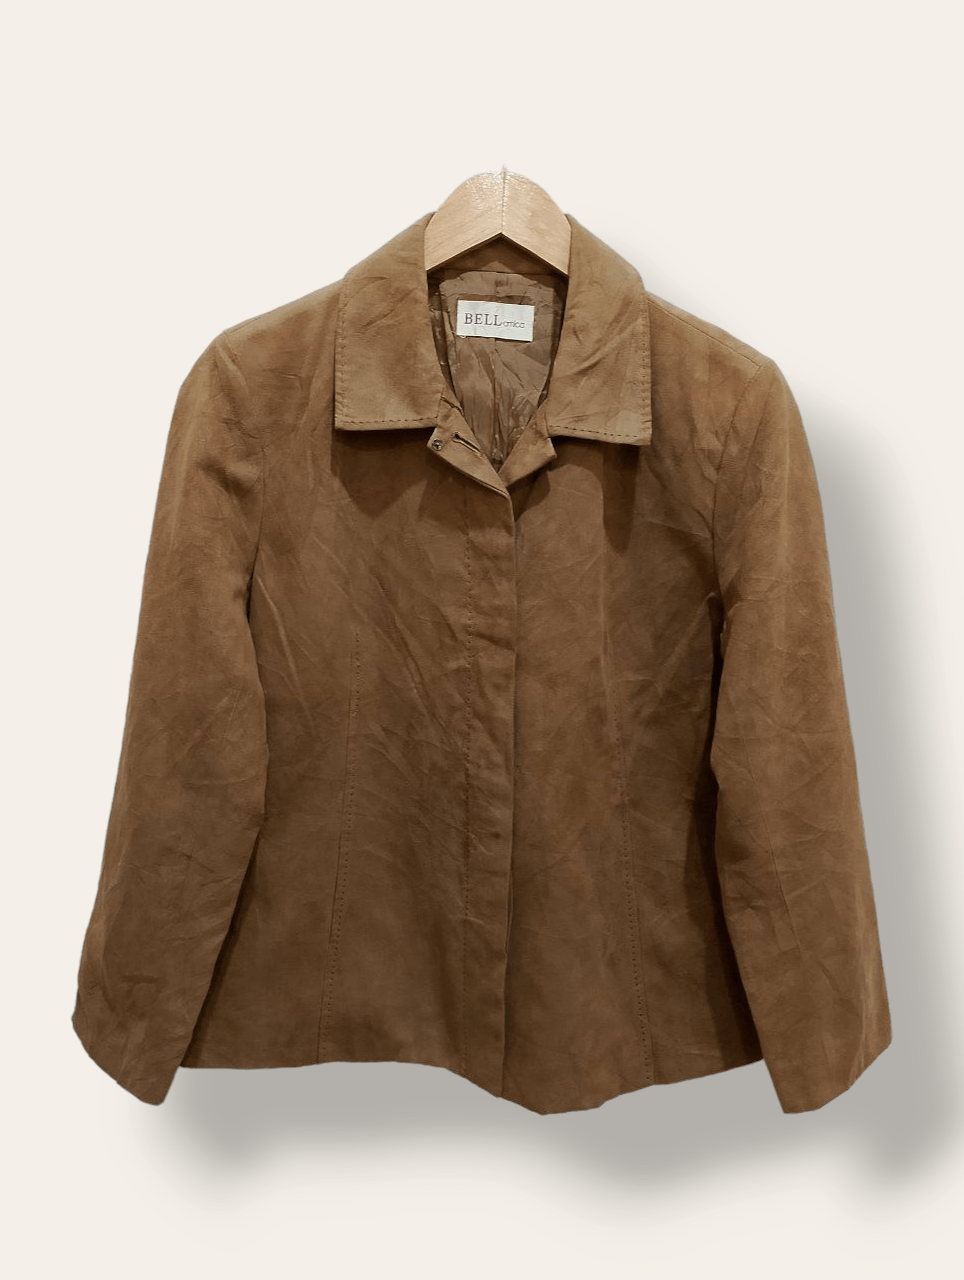 Archival Clothing - BELL AMICA Brown Japan Brand Jacket - 1